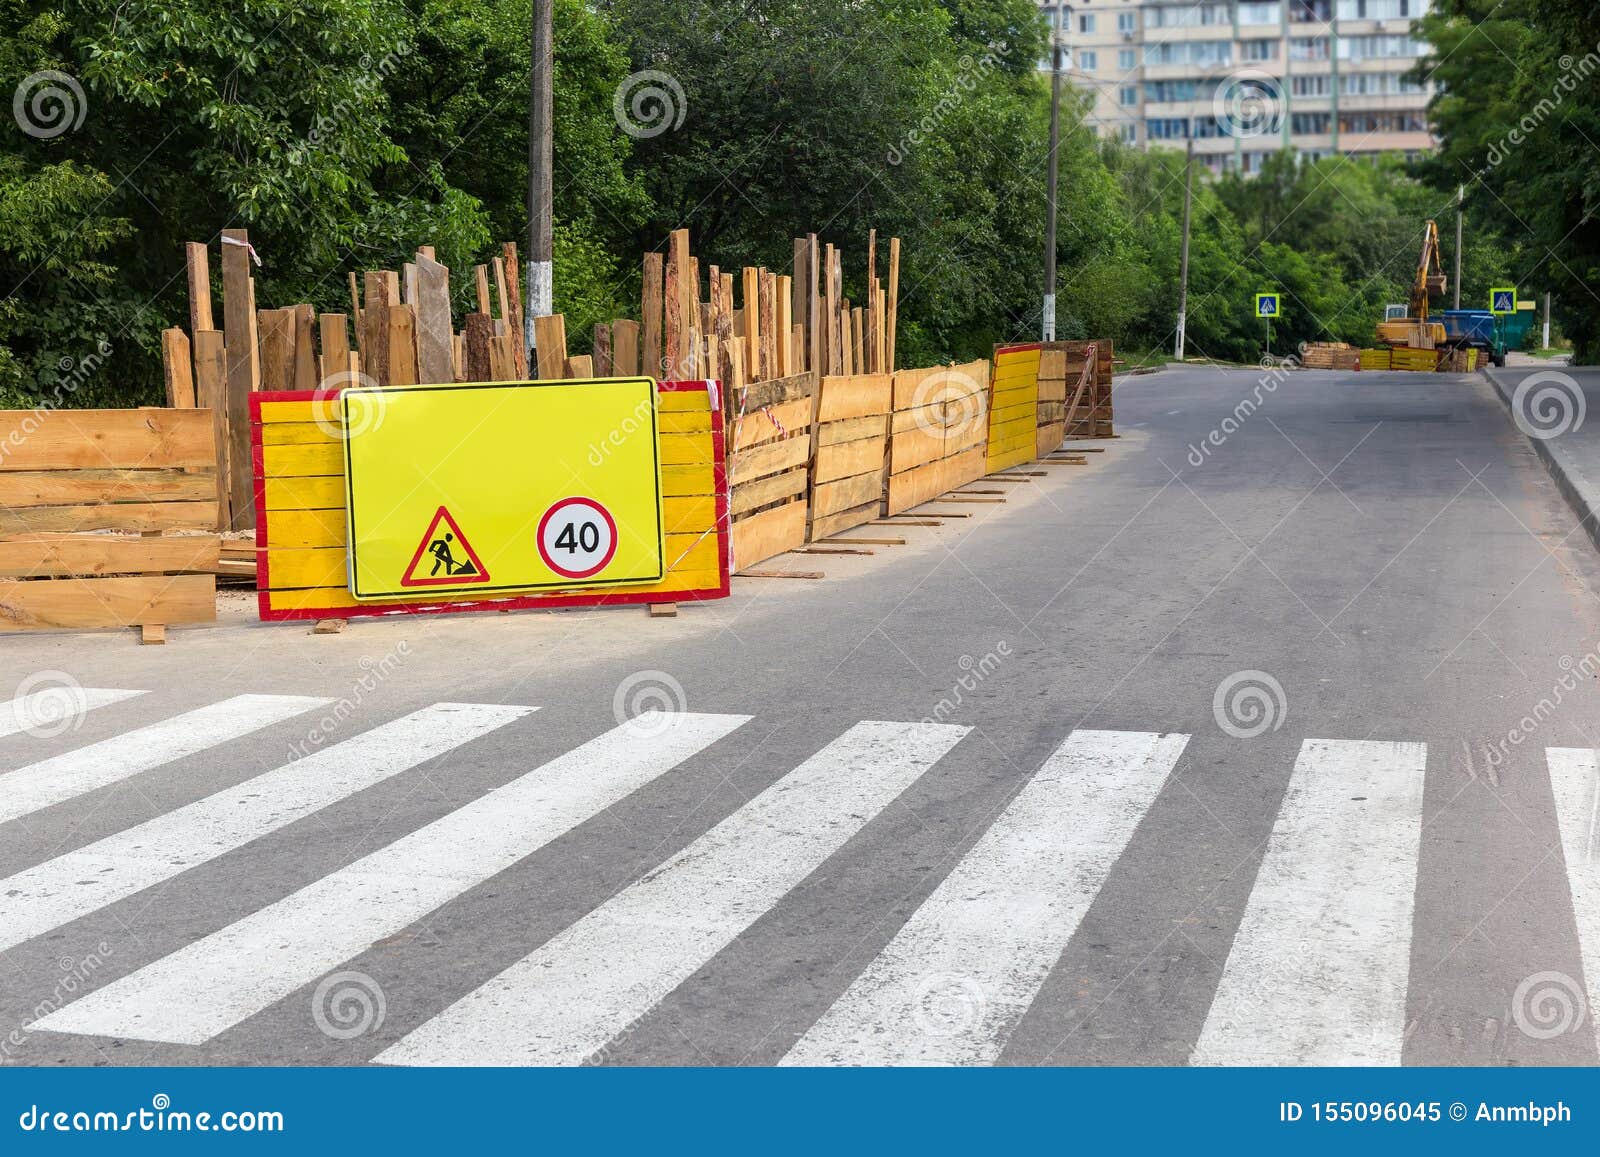 Fenced Section of City Street during of a Roadworks Stock Image - Image ...